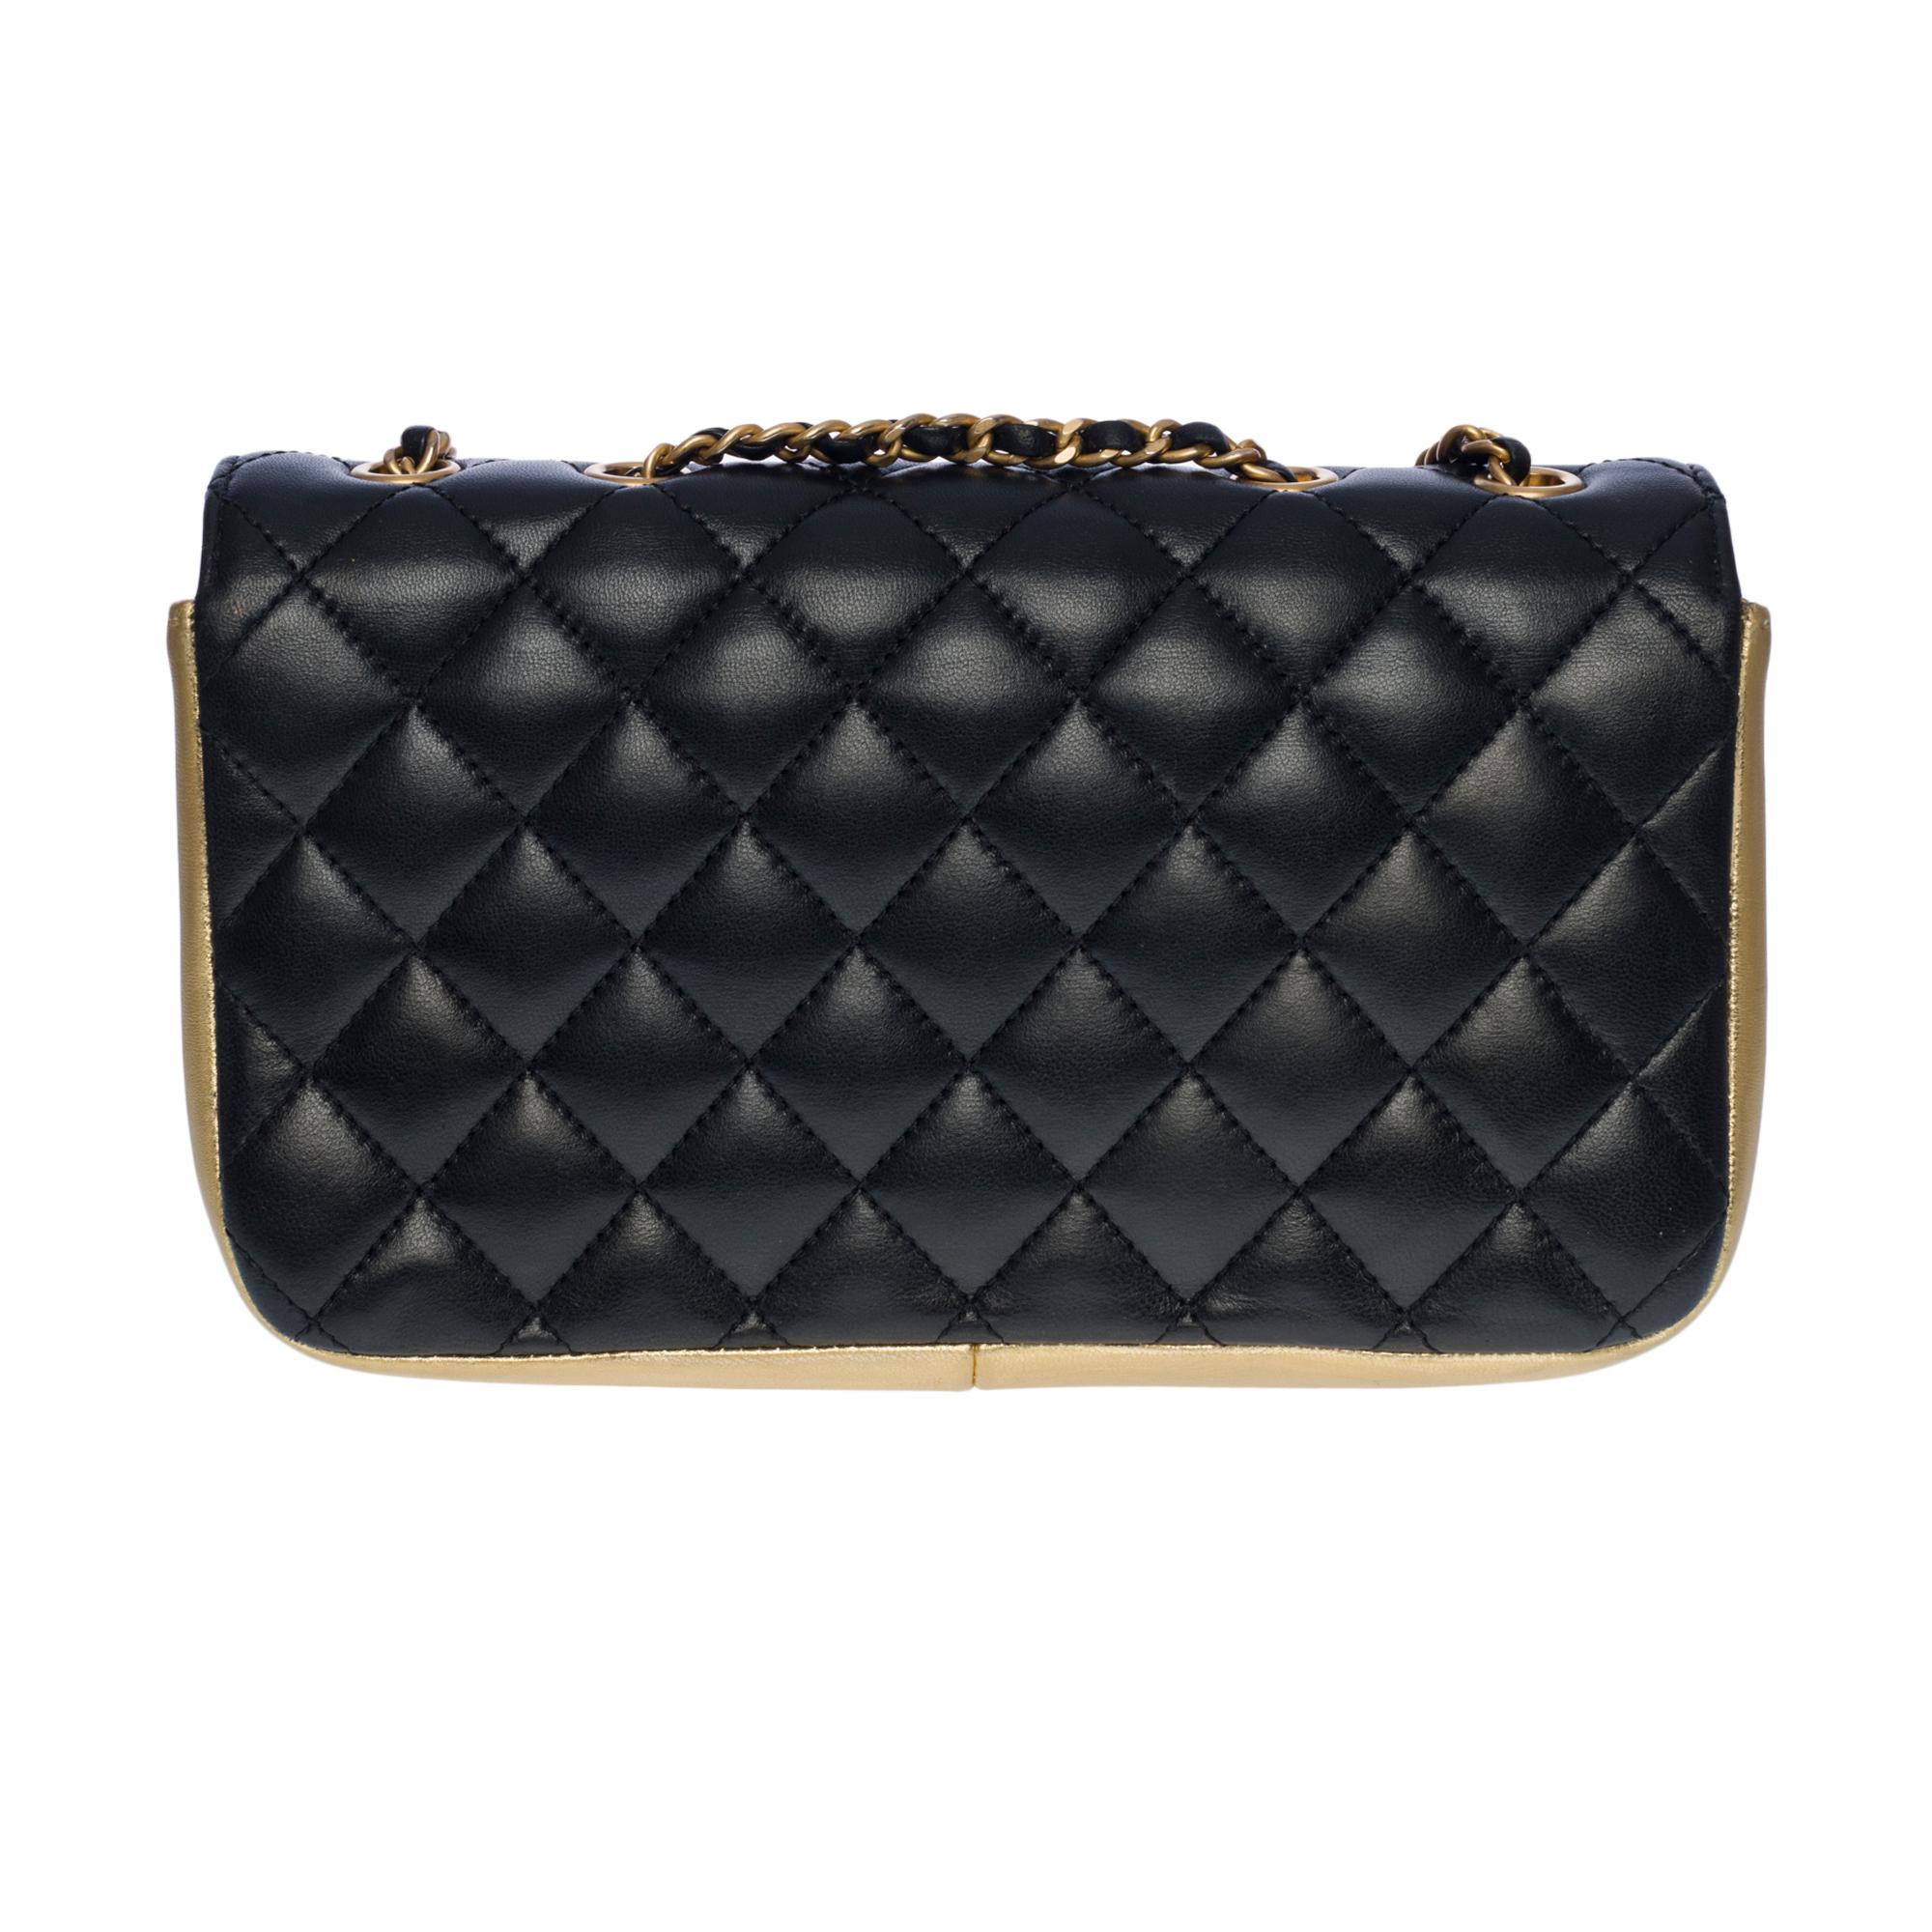 Beautiful & Rare Chanel Classic double flap shoulder bag in black and gold quilted leather, gilded metal hardware, a gold metal chain handle interwoven with black leather that allows a shoulder and crossbody
 
Flap closure, gold-tone CC clasp